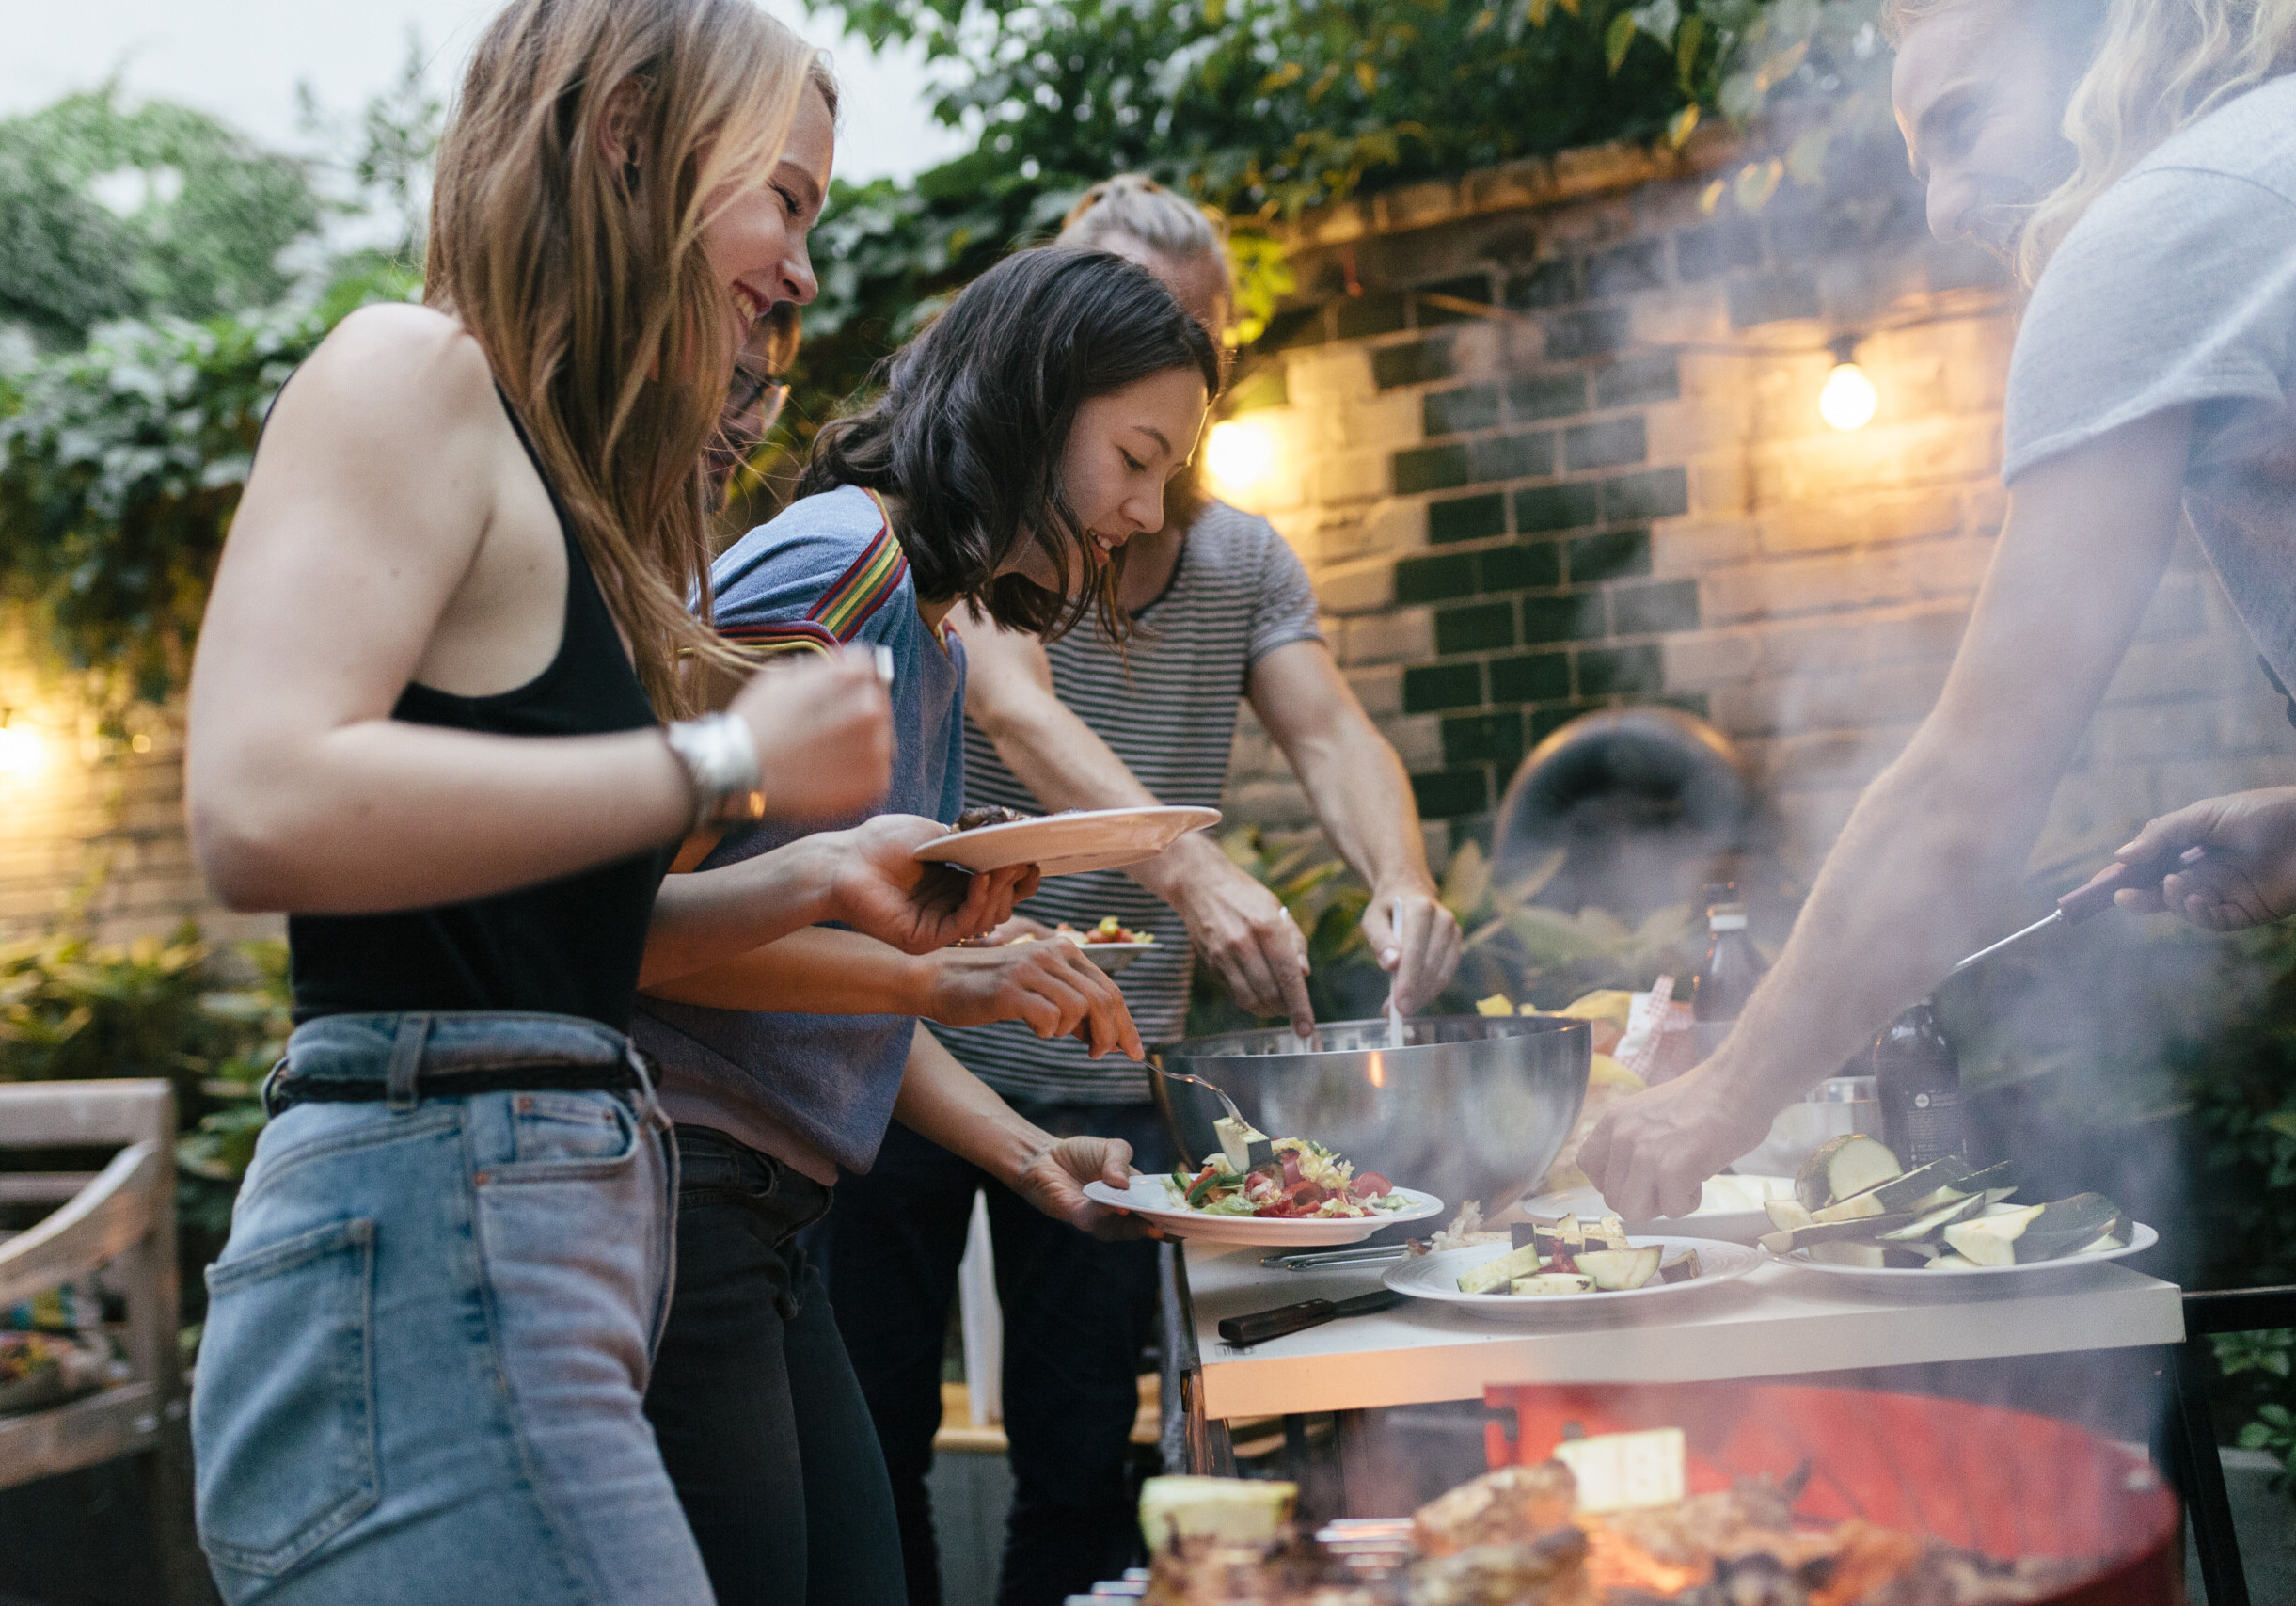 A young group of friends are helping themselves to freshly prepared food at a summer evening Barbecue.